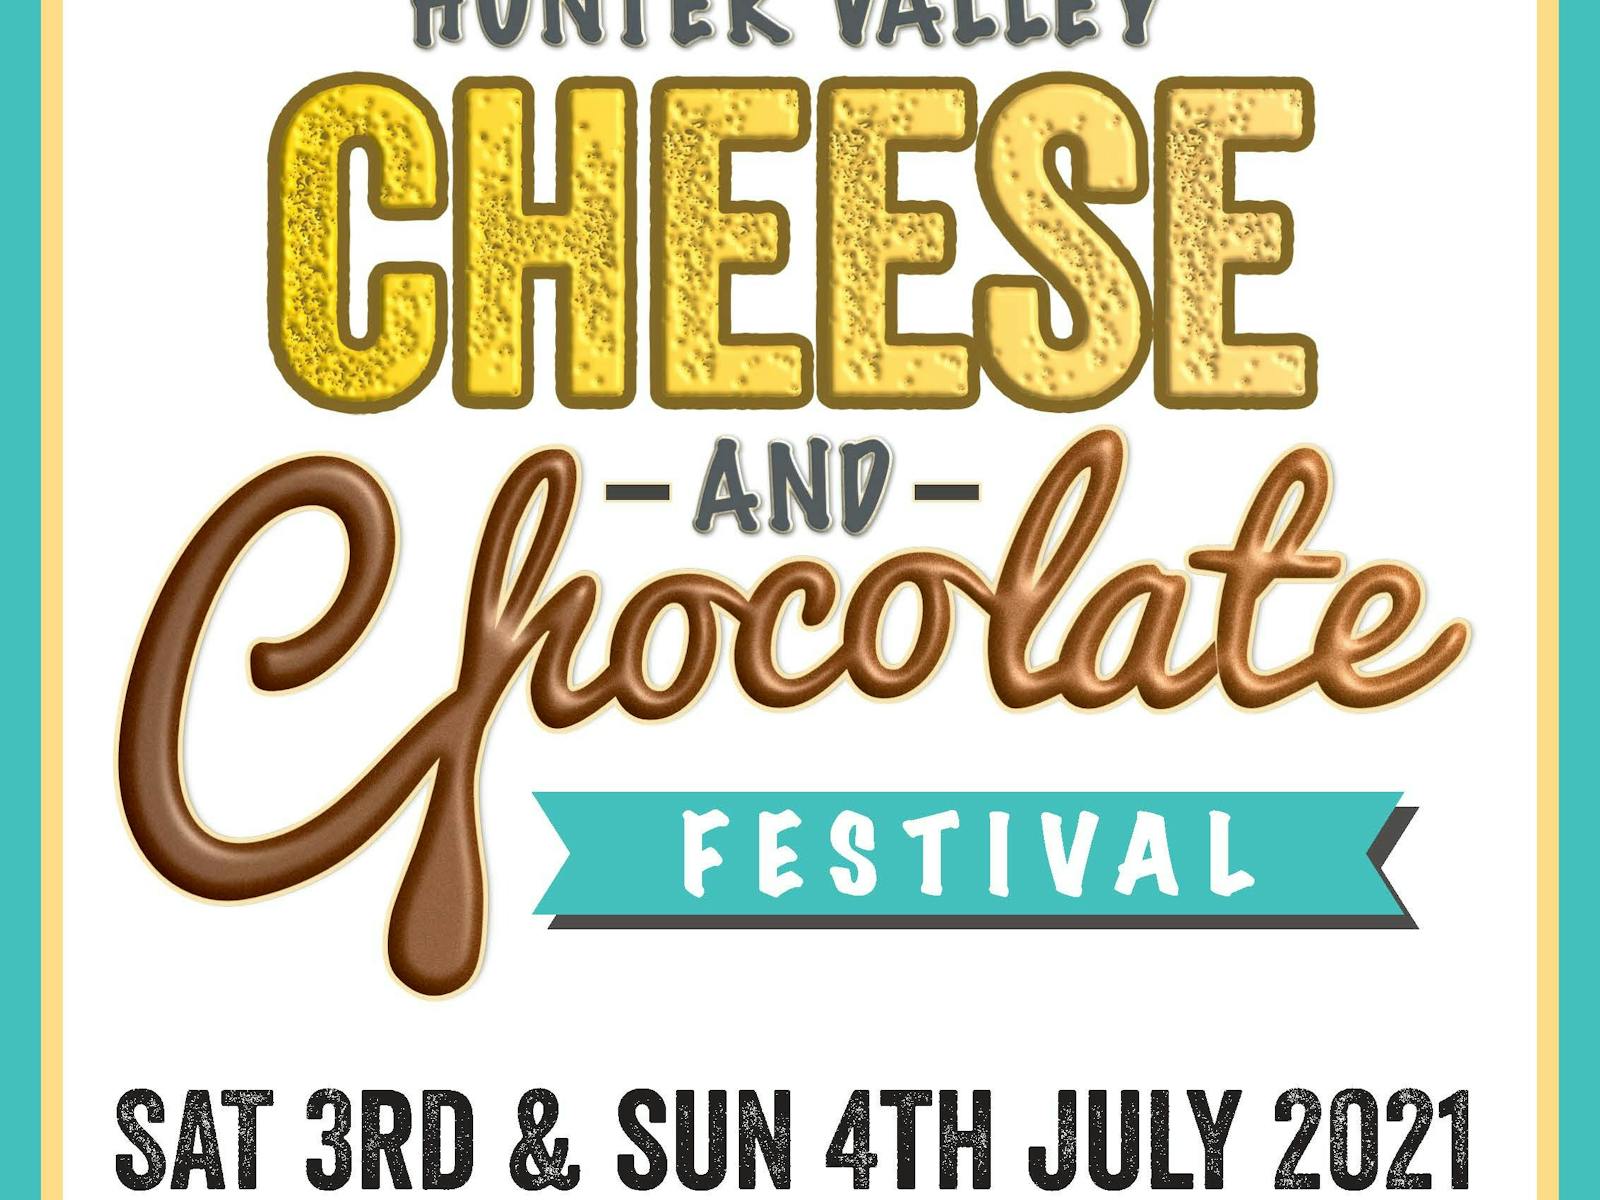 Image for Hunter Valley Cheese & Chocolate Festival